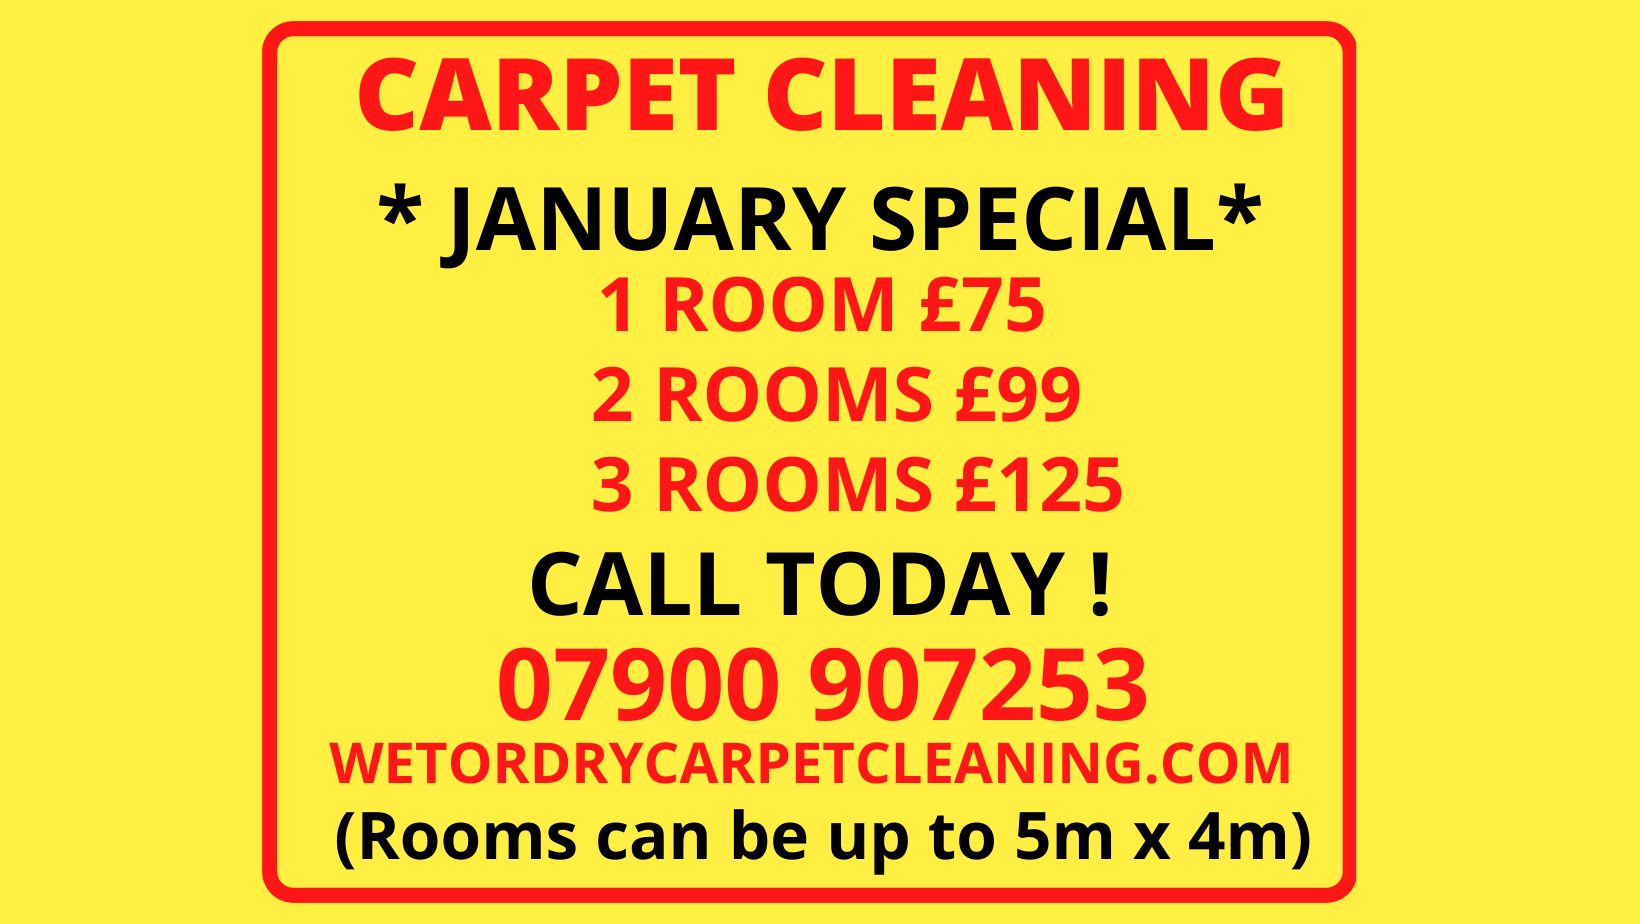 January Special - 3 Rooms Cleaned for £125.00